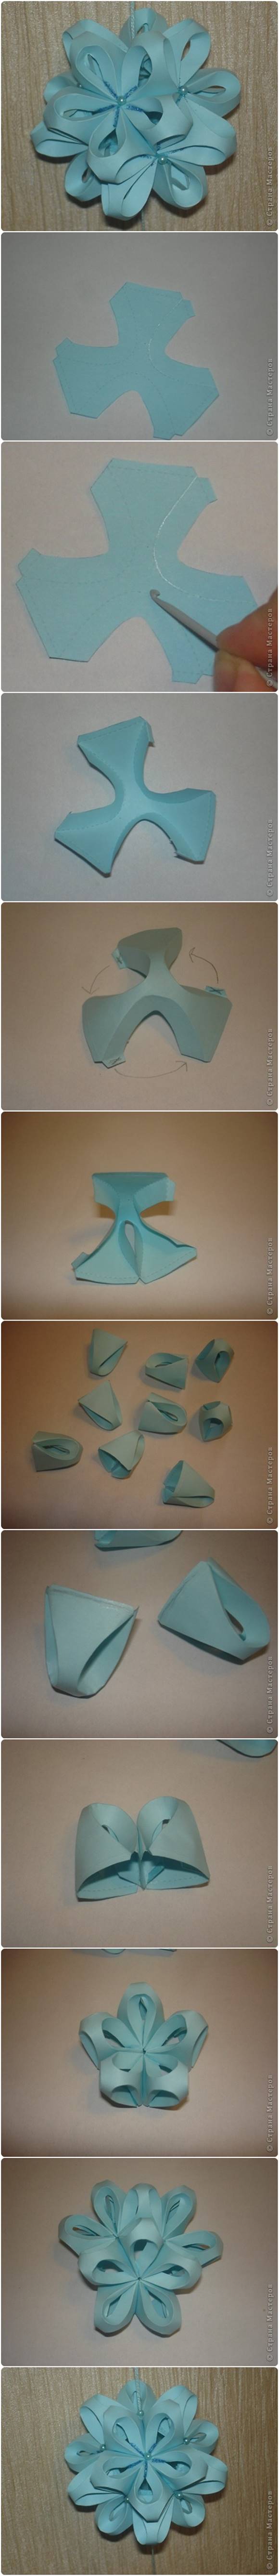 How to DIY Origami Paper Flower Ball Decor